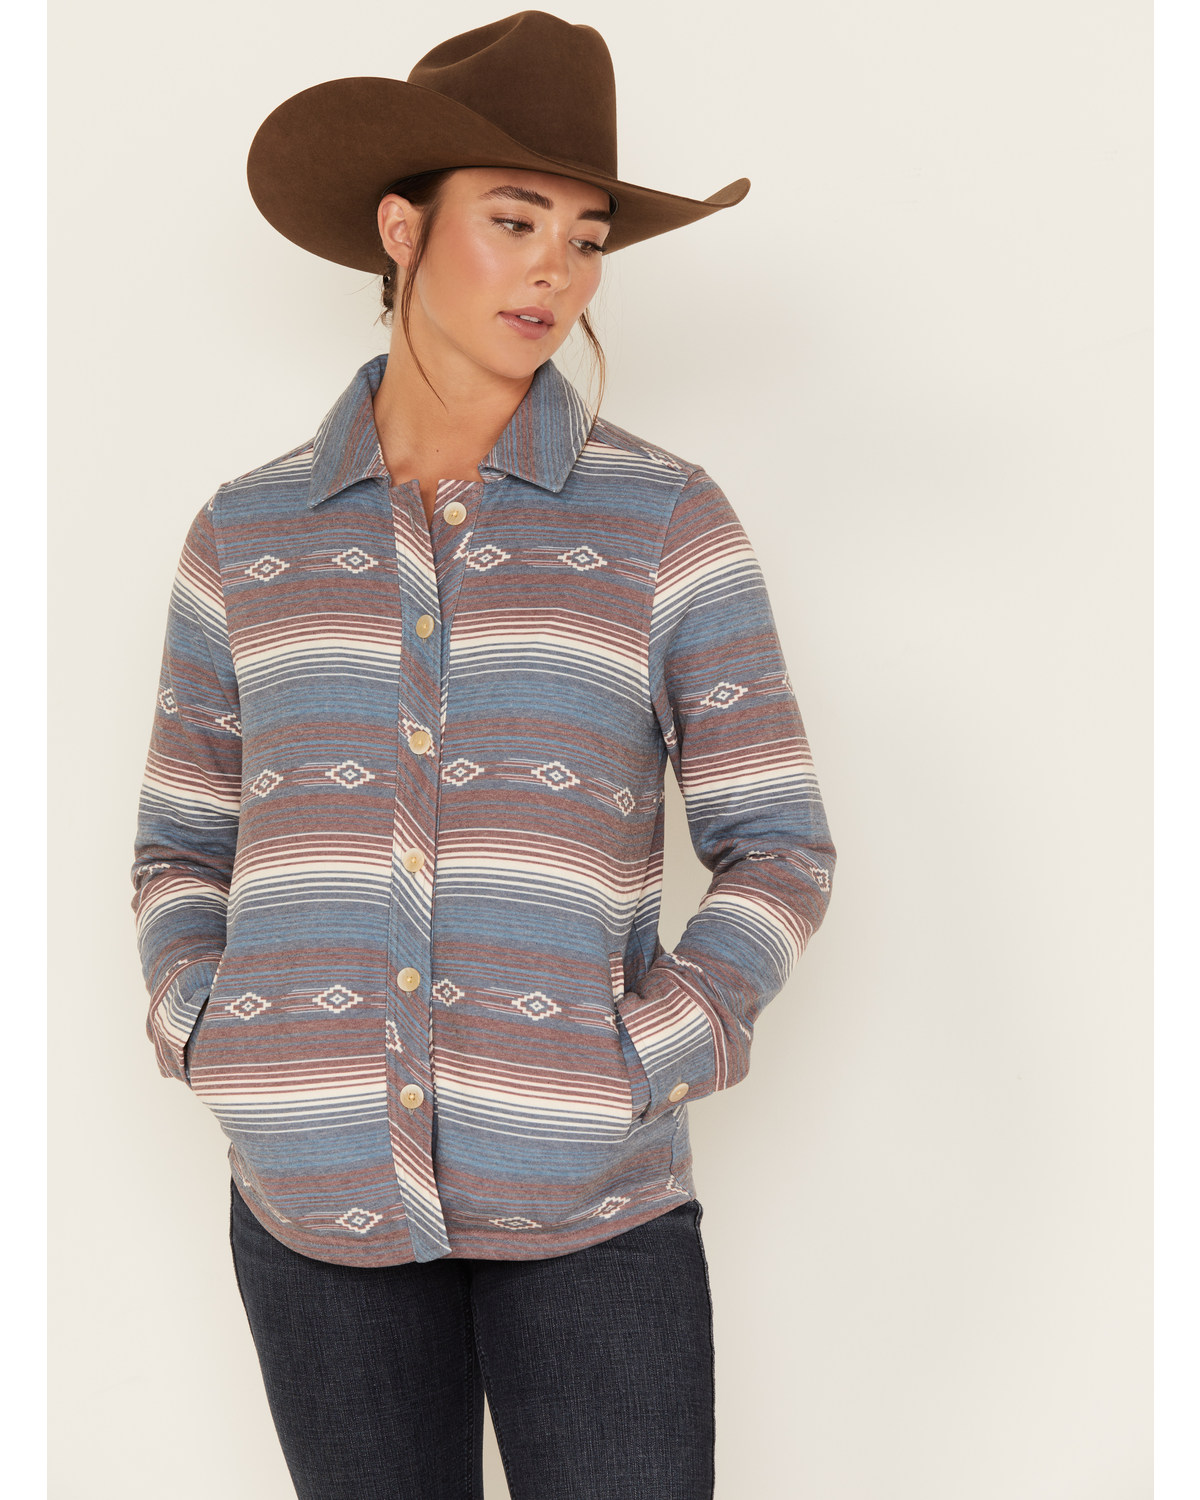 RANK 45® Women's Quilted Multicolored Southwestern Shacket